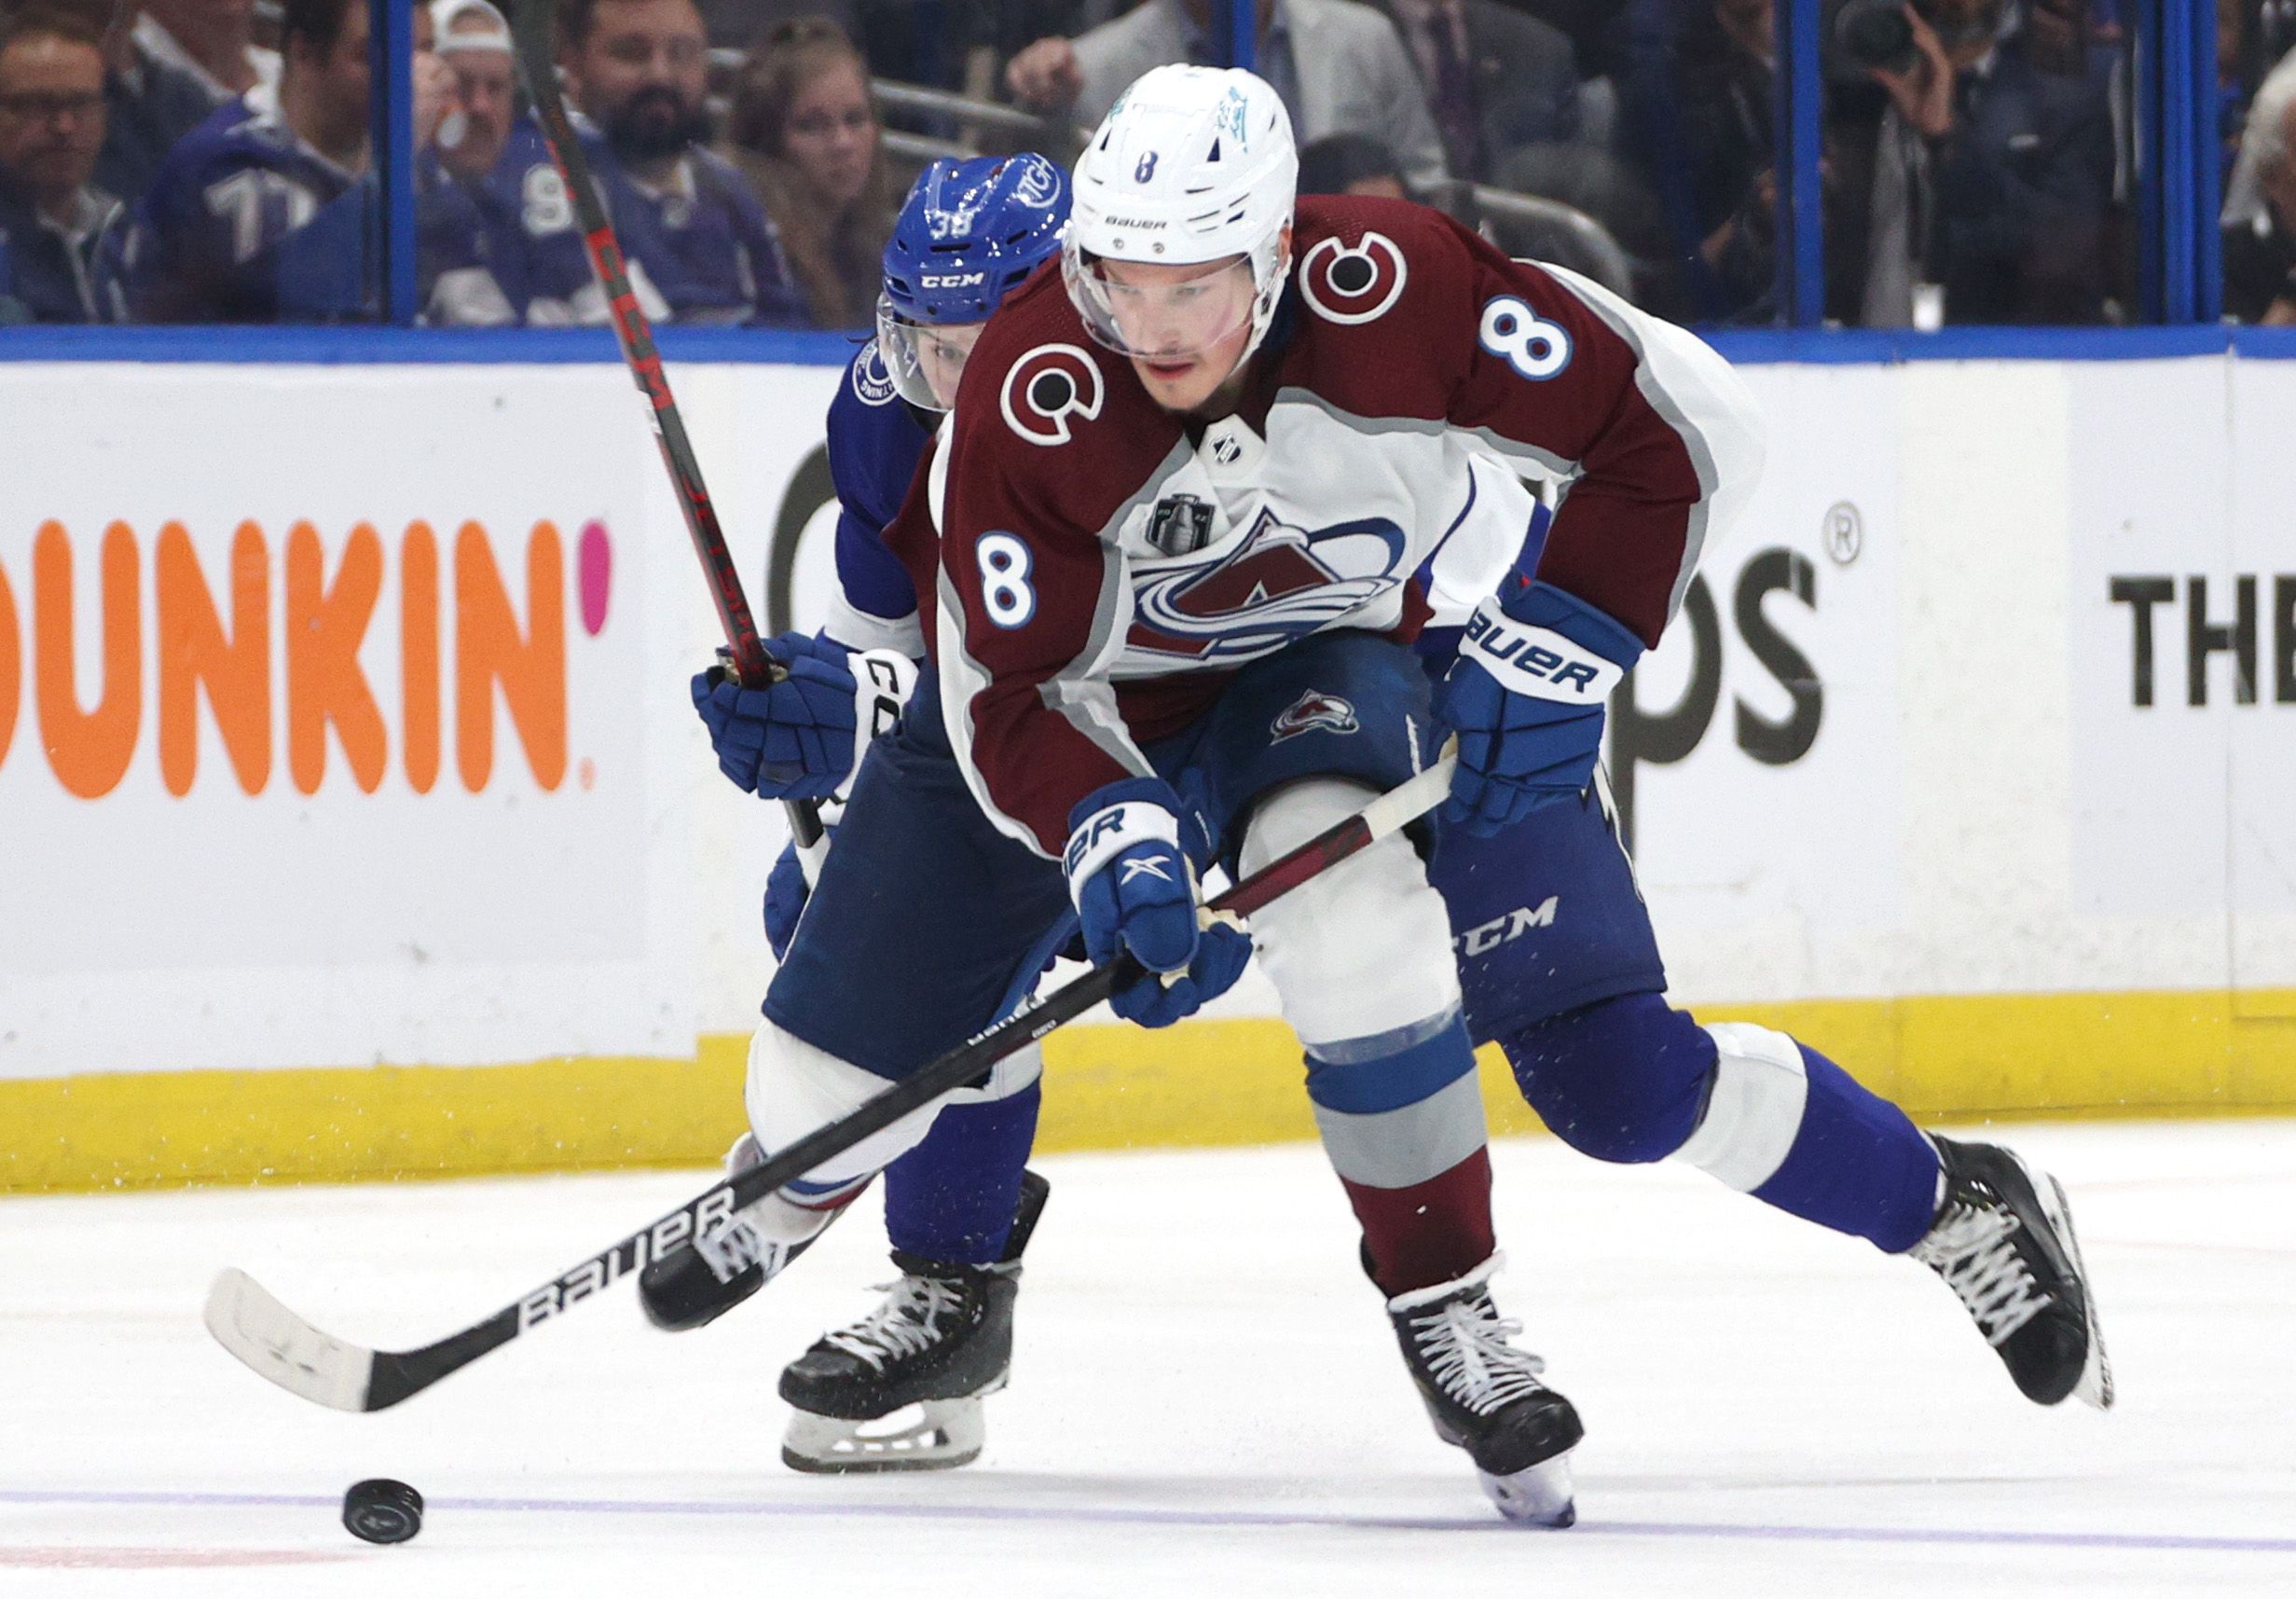 Defenseman Cale Makar played outstanding minutes and finished with 29 points in 20 games to win the NHL playoff's most valuable player award. Photo: Dave Sandford/NHLI via Getty Images